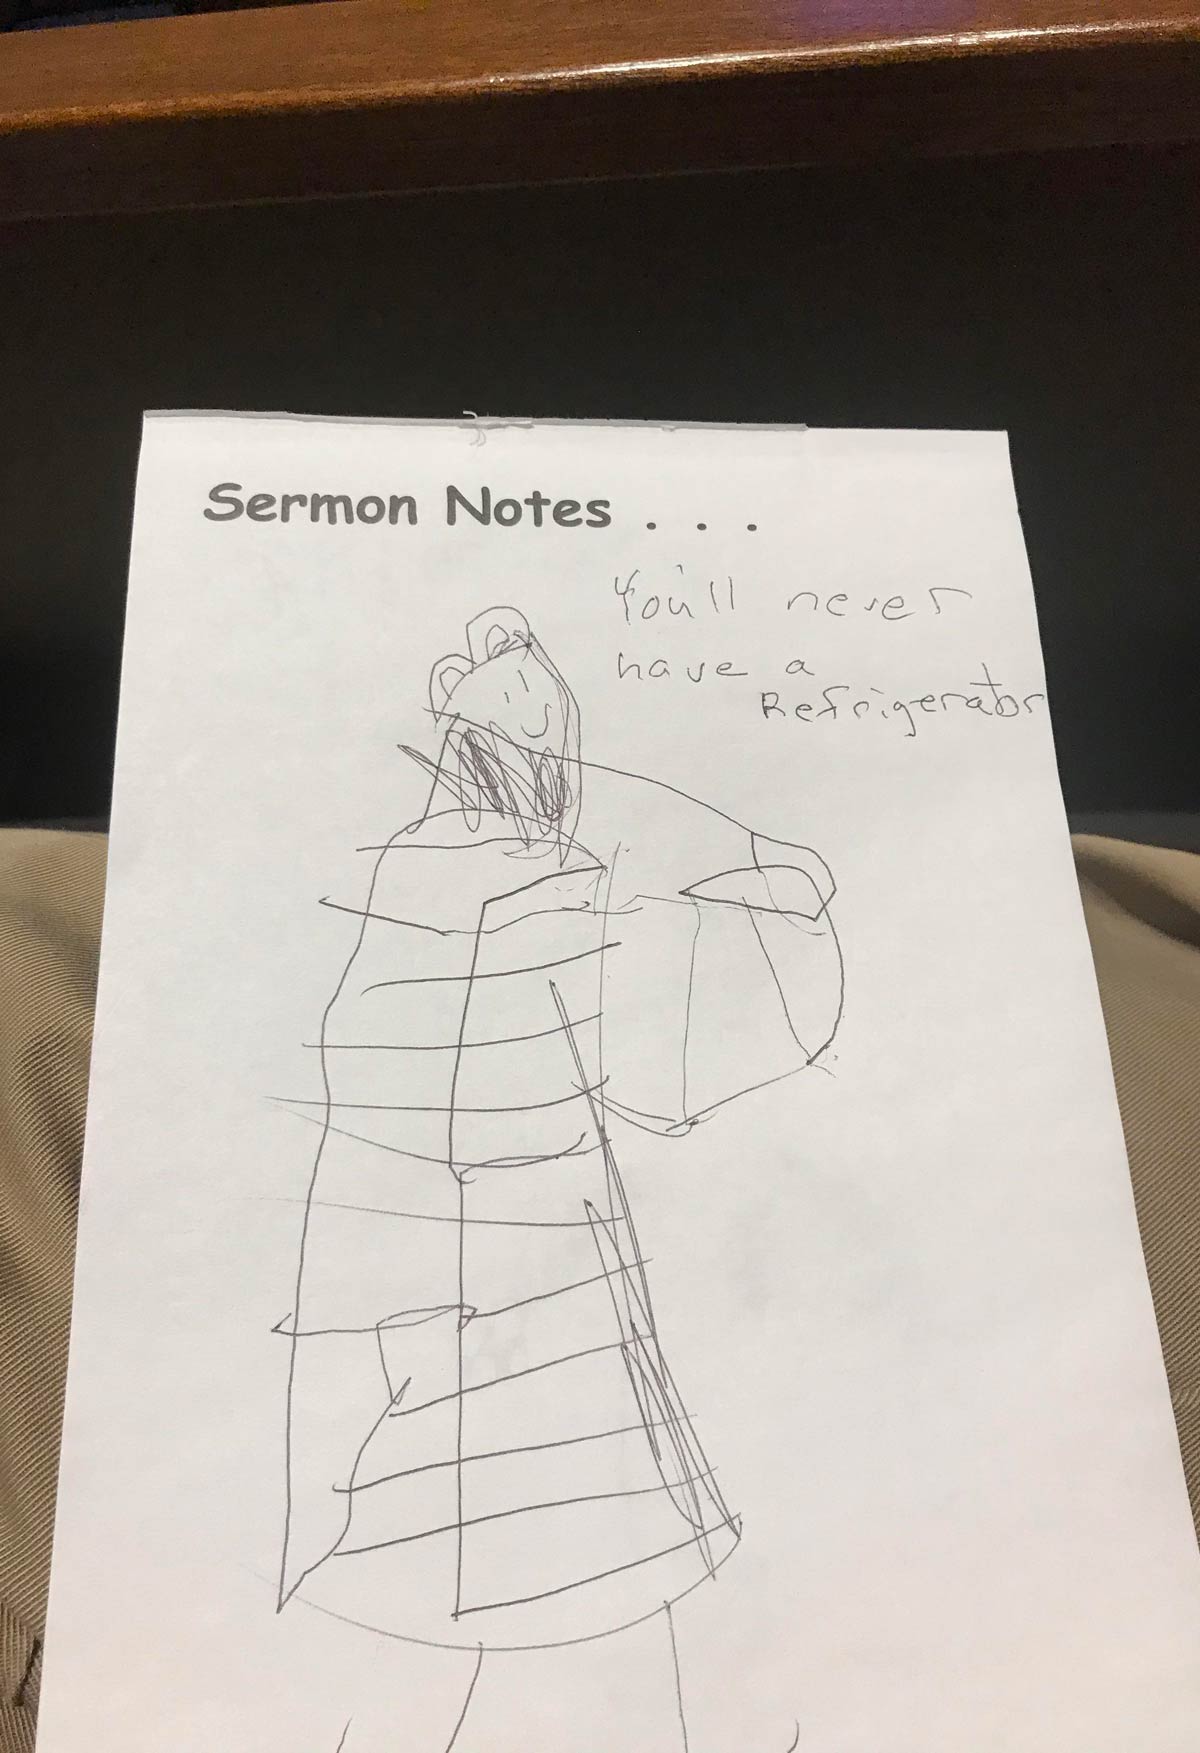 Found this in the pews at my church